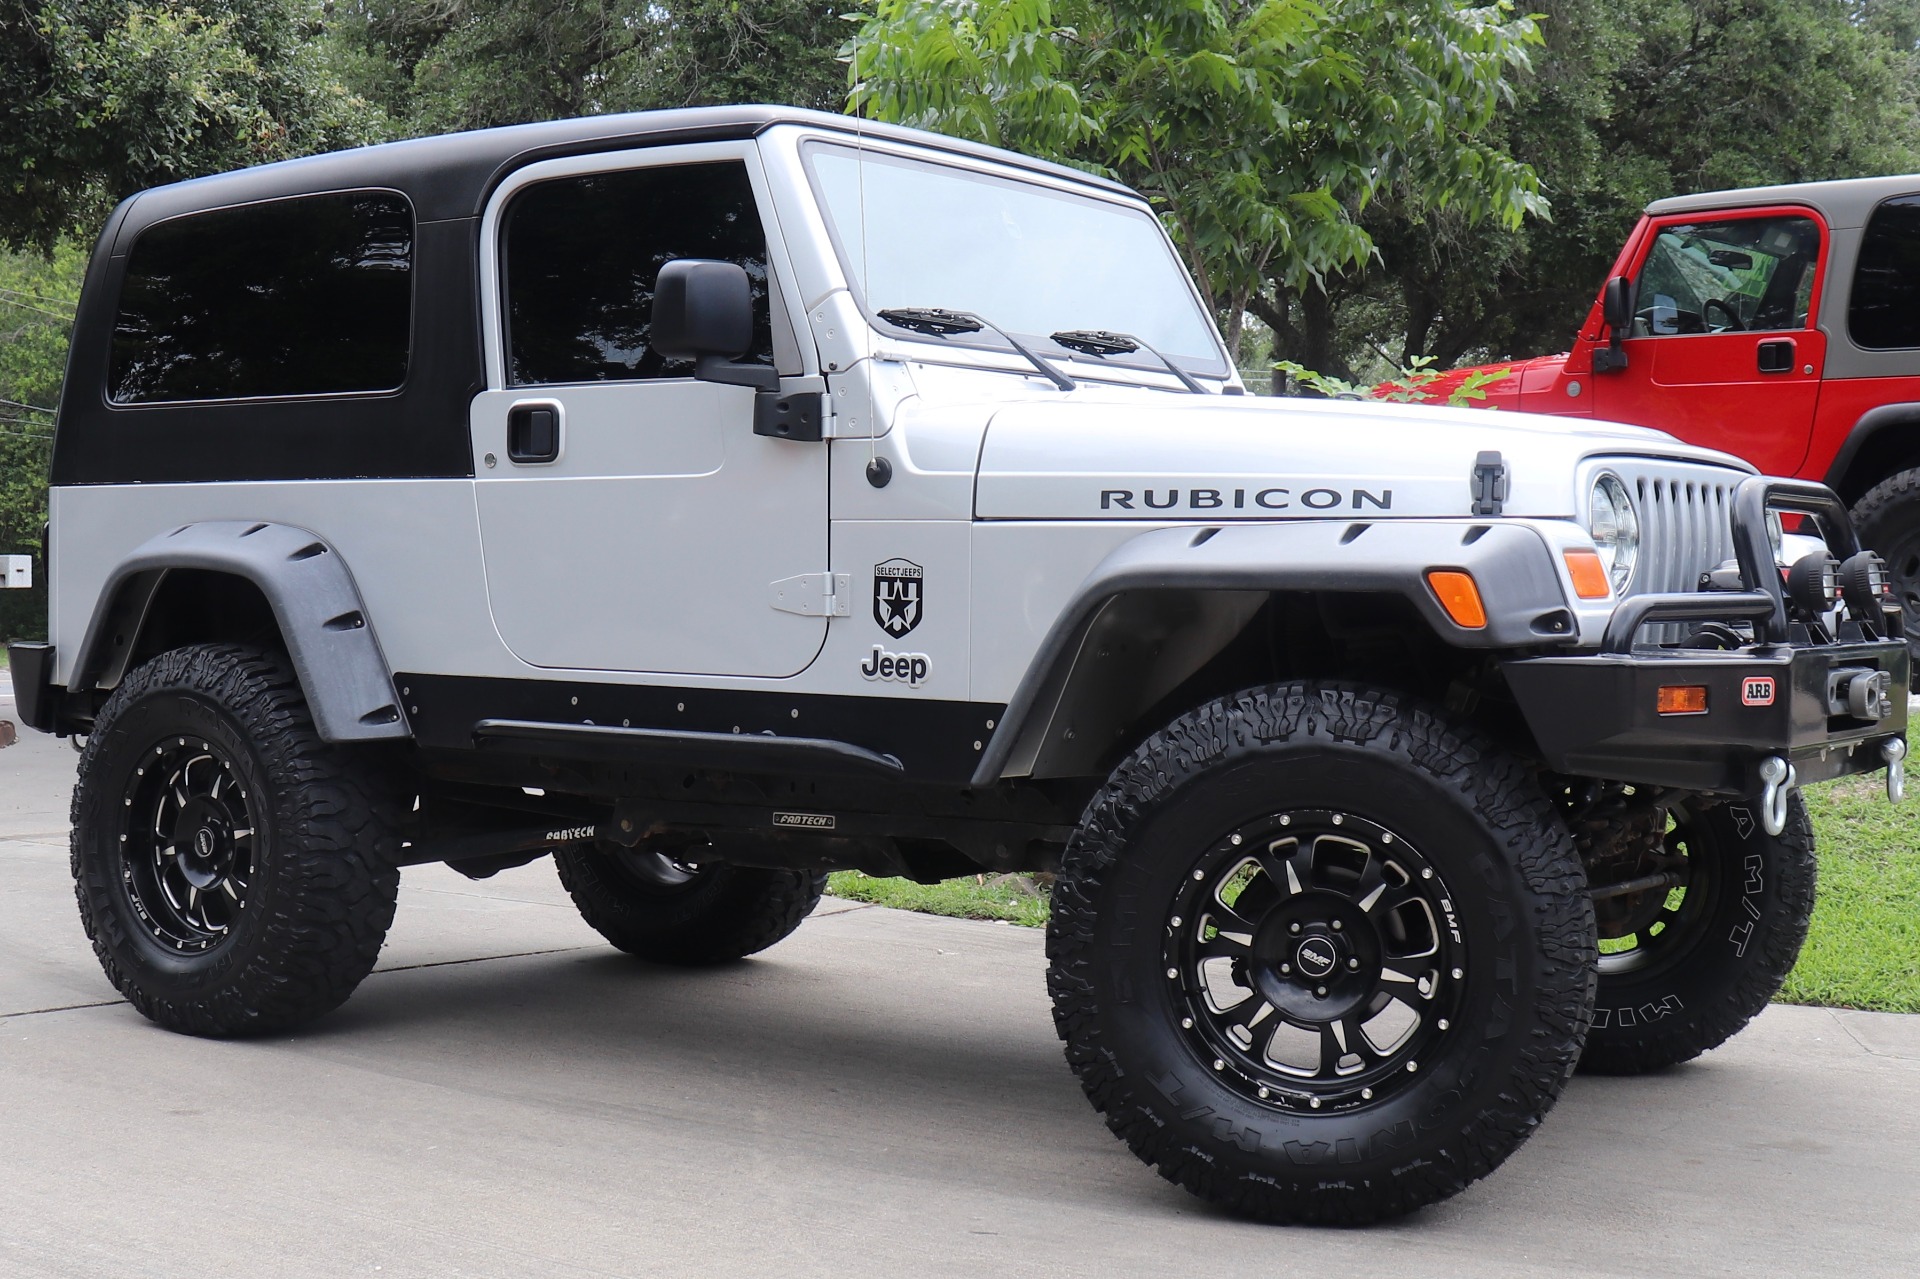 Used 2006 Jeep Wrangler Unlimited Rubicon For Sale ($35,995) | Select Jeeps  Inc. Stock #773880